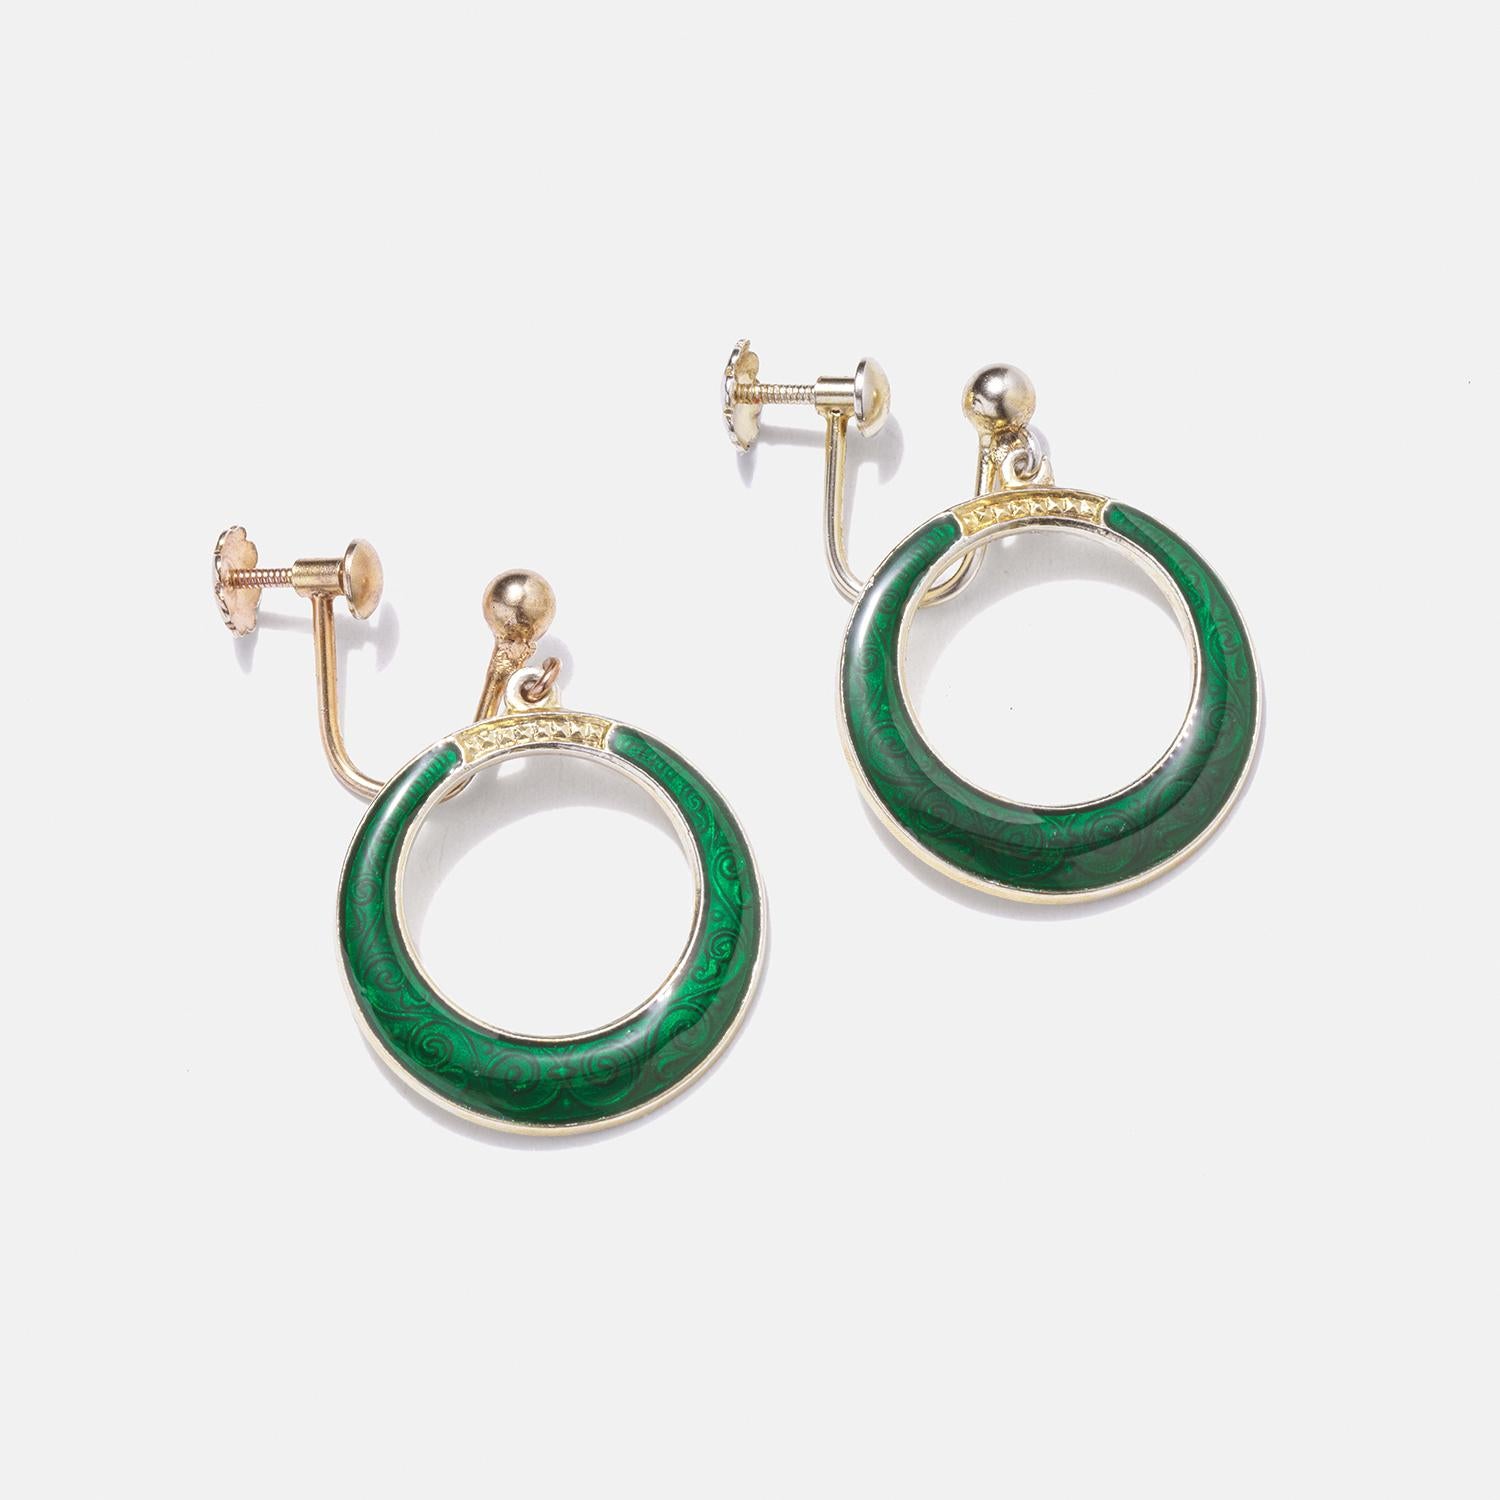 Vintage Gilded Silver and Enamel Circle Earrings. 1950s In Good Condition For Sale In Stockholm, SE